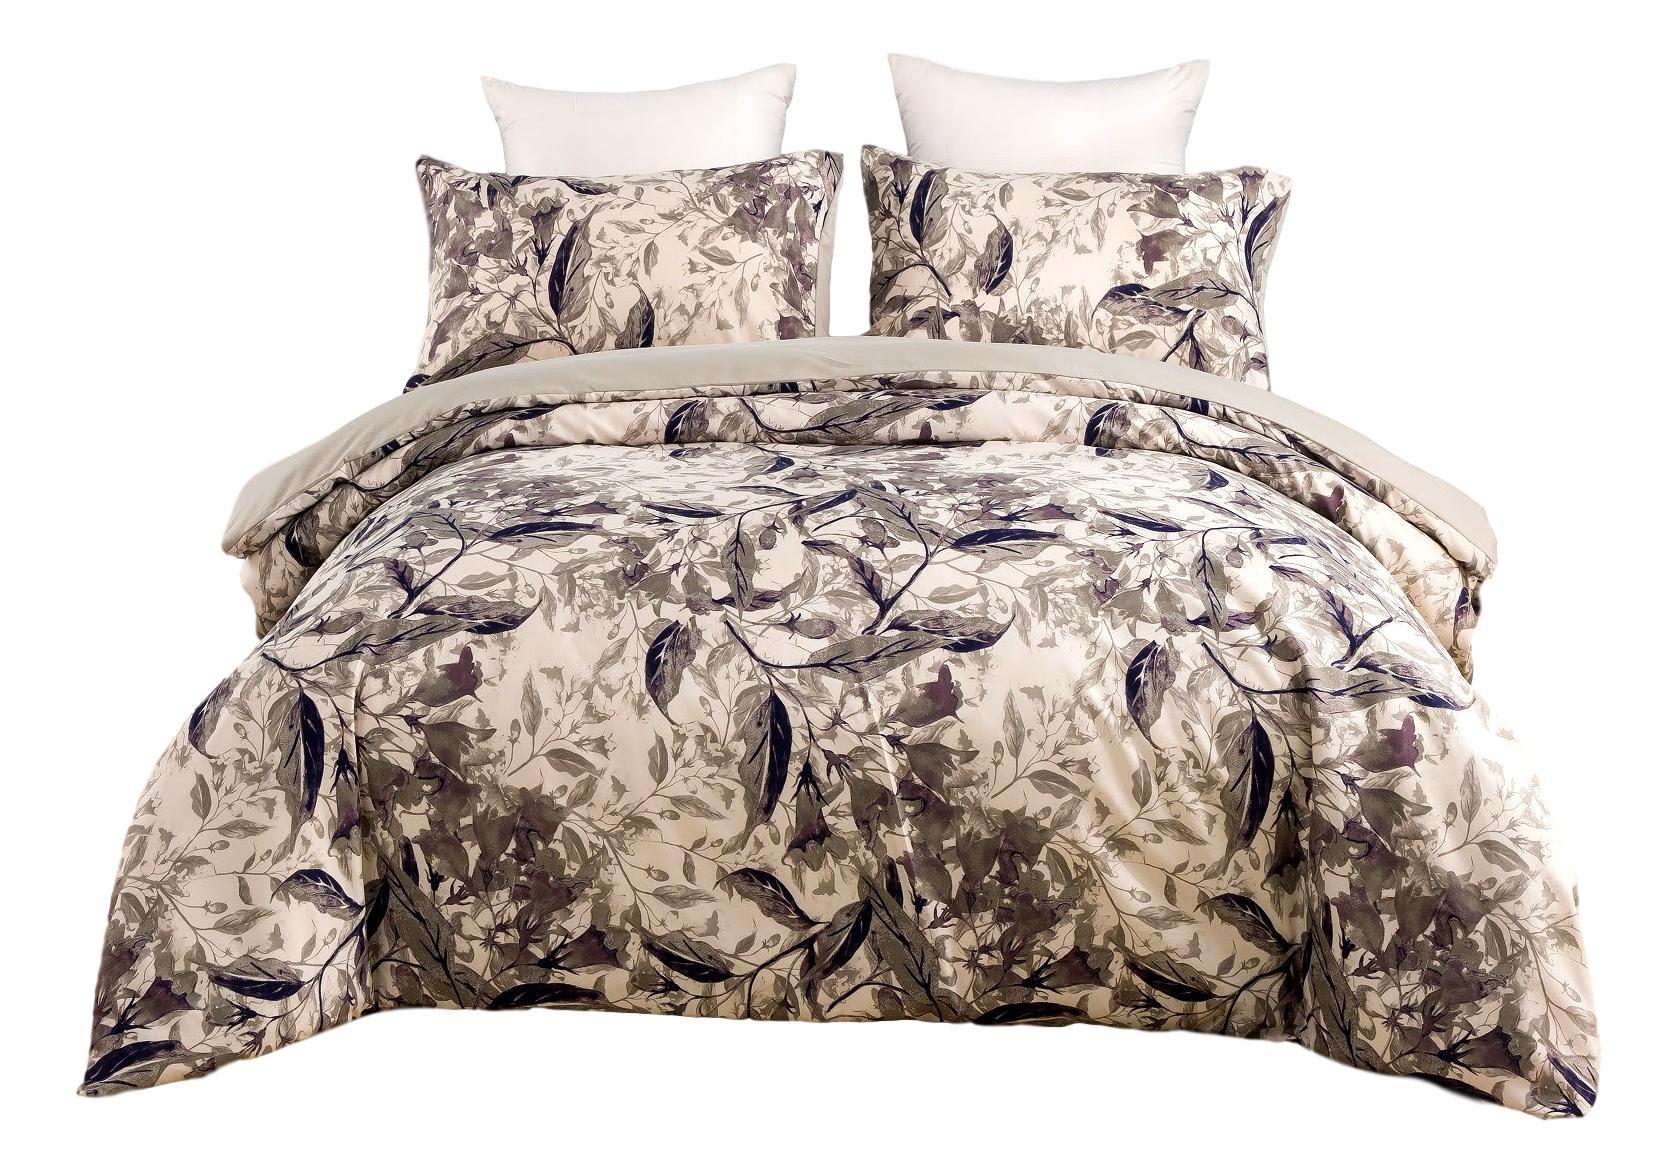 Tache Microfiber Abstract Wispy Leaf Taupe Grey Duvet Cover (JHW-843)